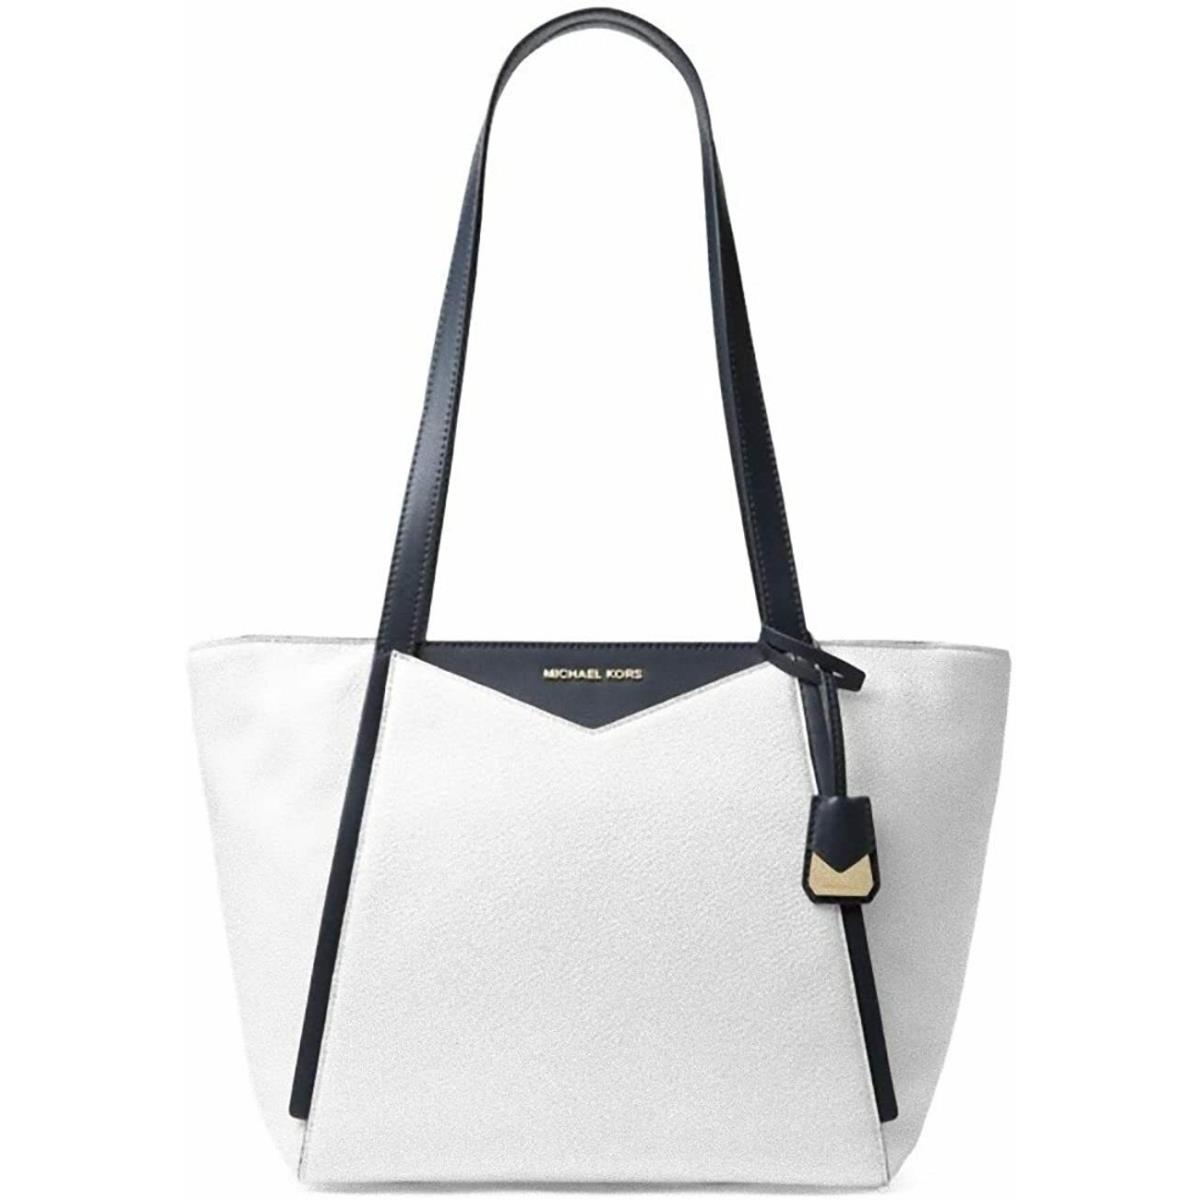 Michael Kors Whitney Small Leather Top Zip Tote Optic White Navy Handbag Bag - Optic white and navy blue admiral Exterior